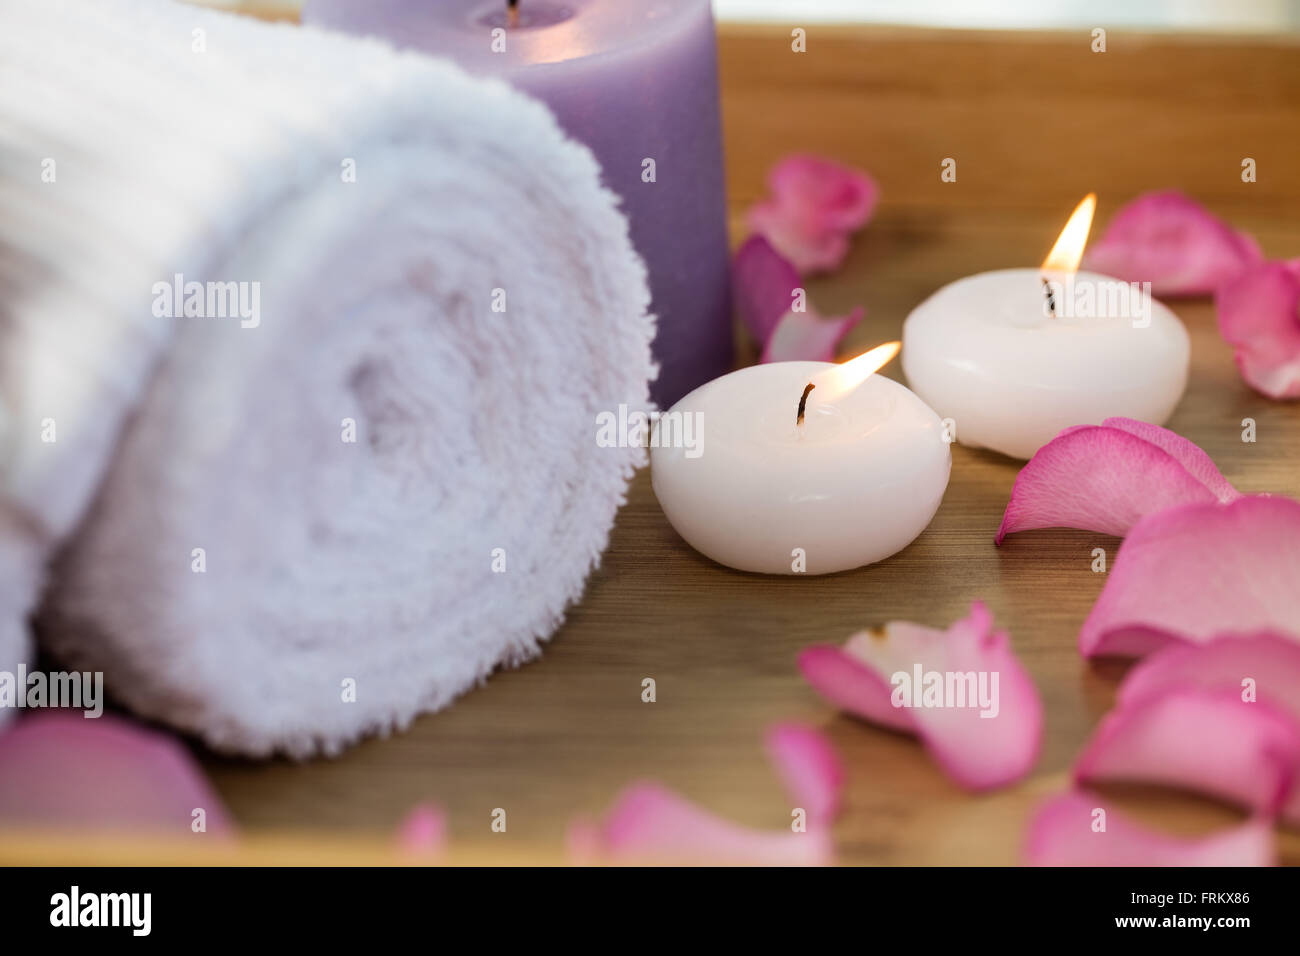 Tray of beauty therapy items Stock Photo